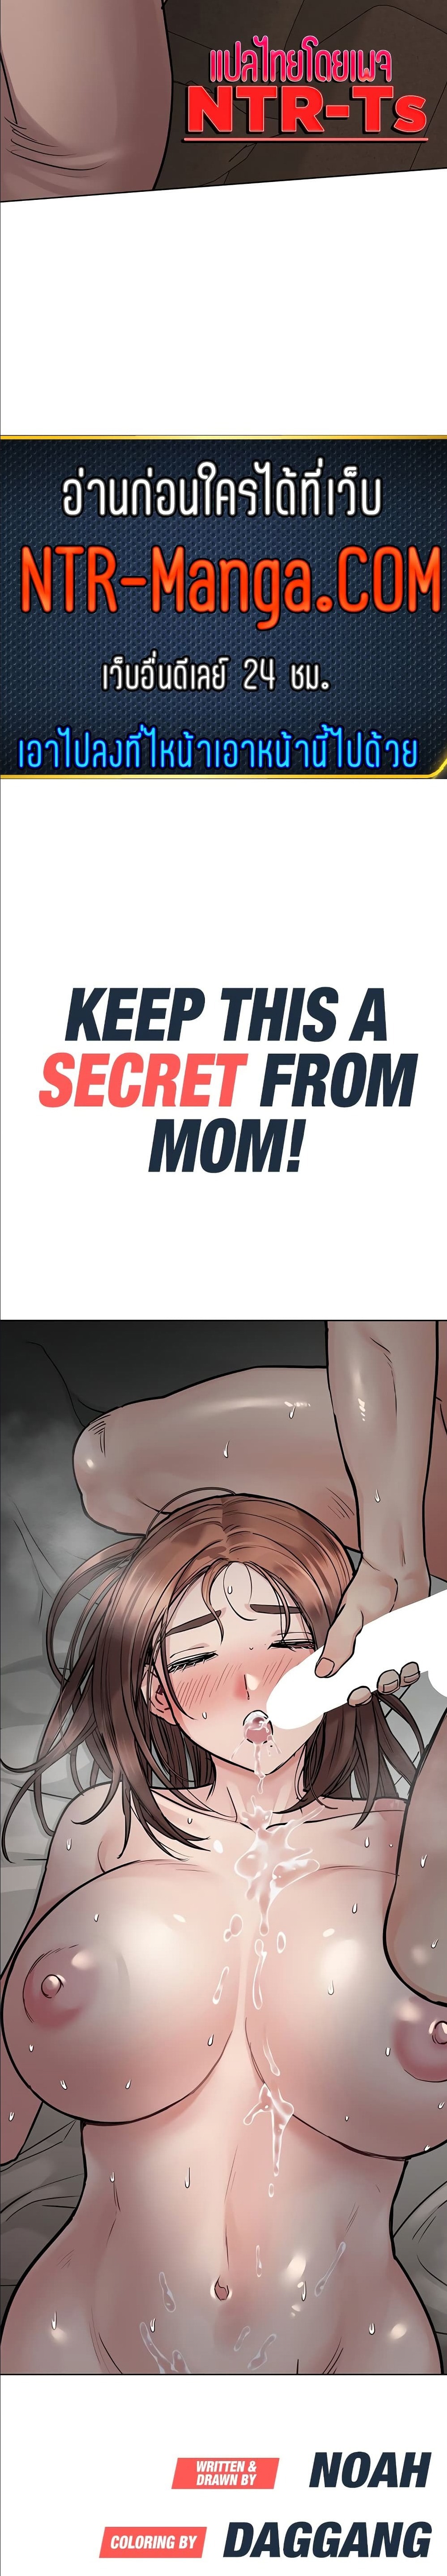 Keep it a secret from your mother! 56 38